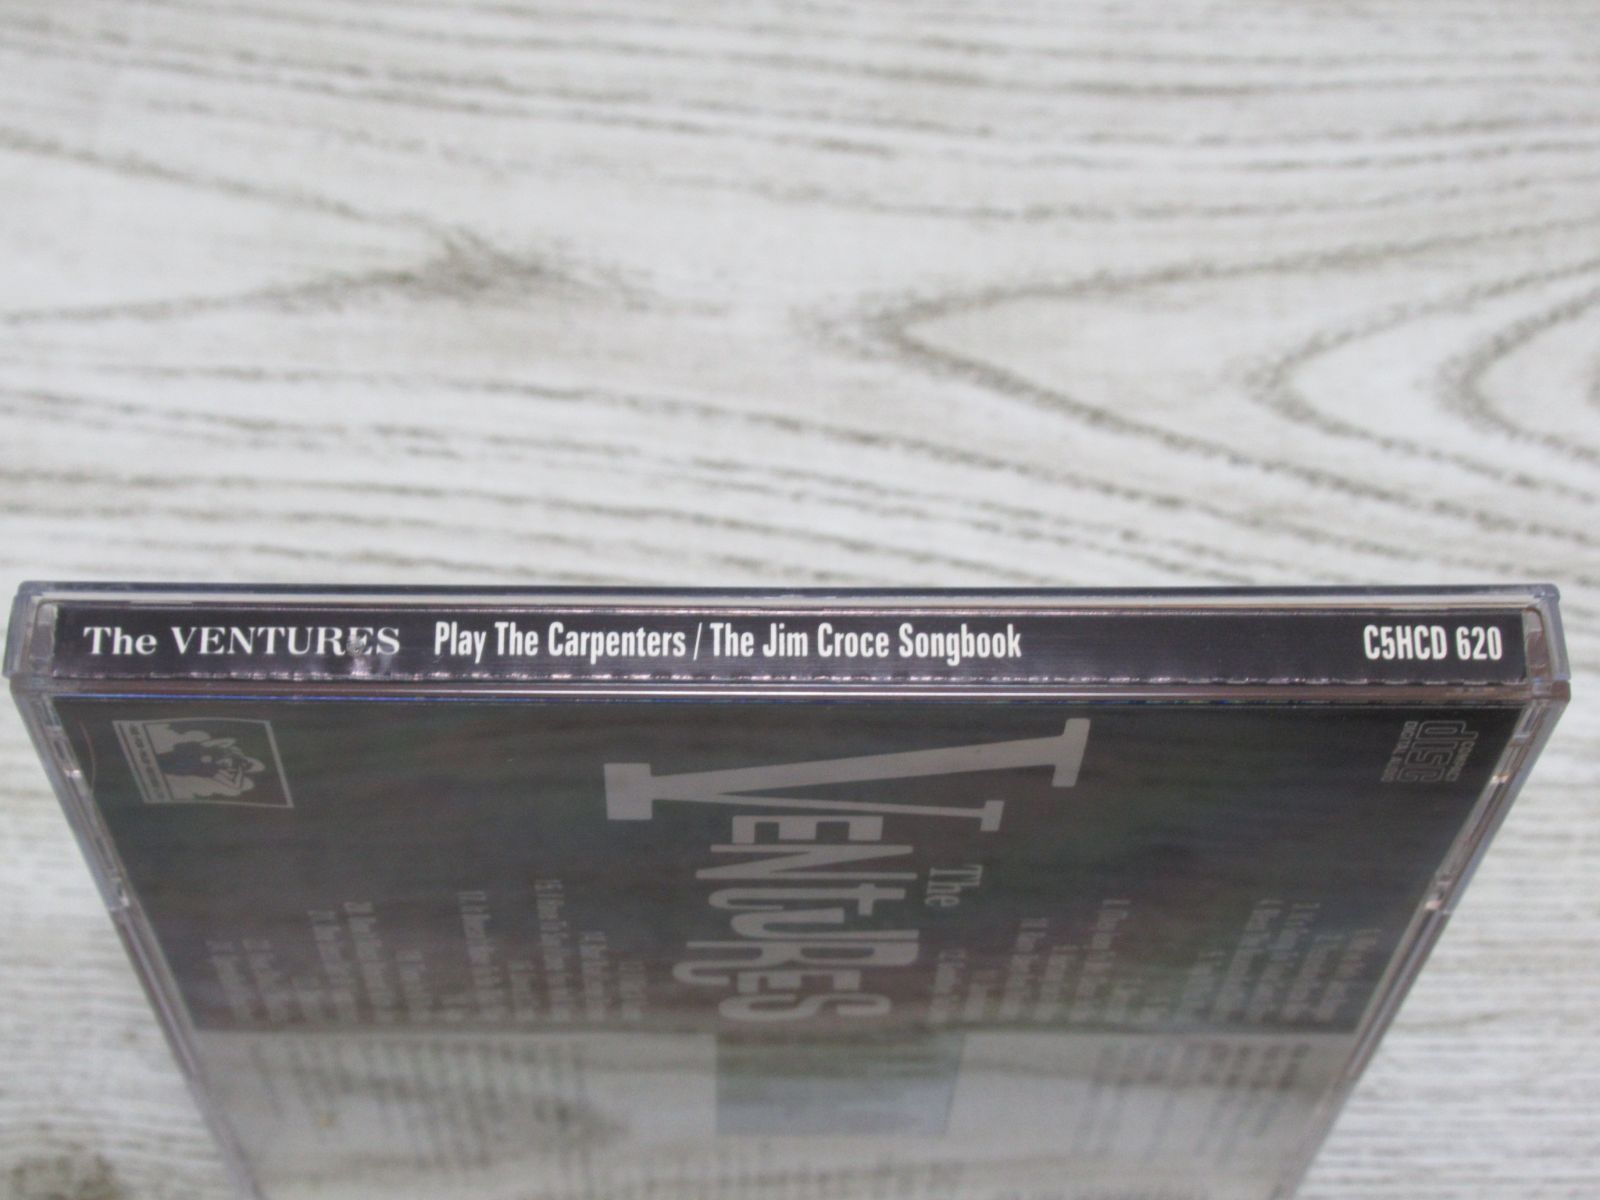 CD　VENTURES　PLAY THE CARPENTERS / THE JIM CROCE SONGBOOK　2ON1　C5HCD 620　 全24曲 ベンチャーズ